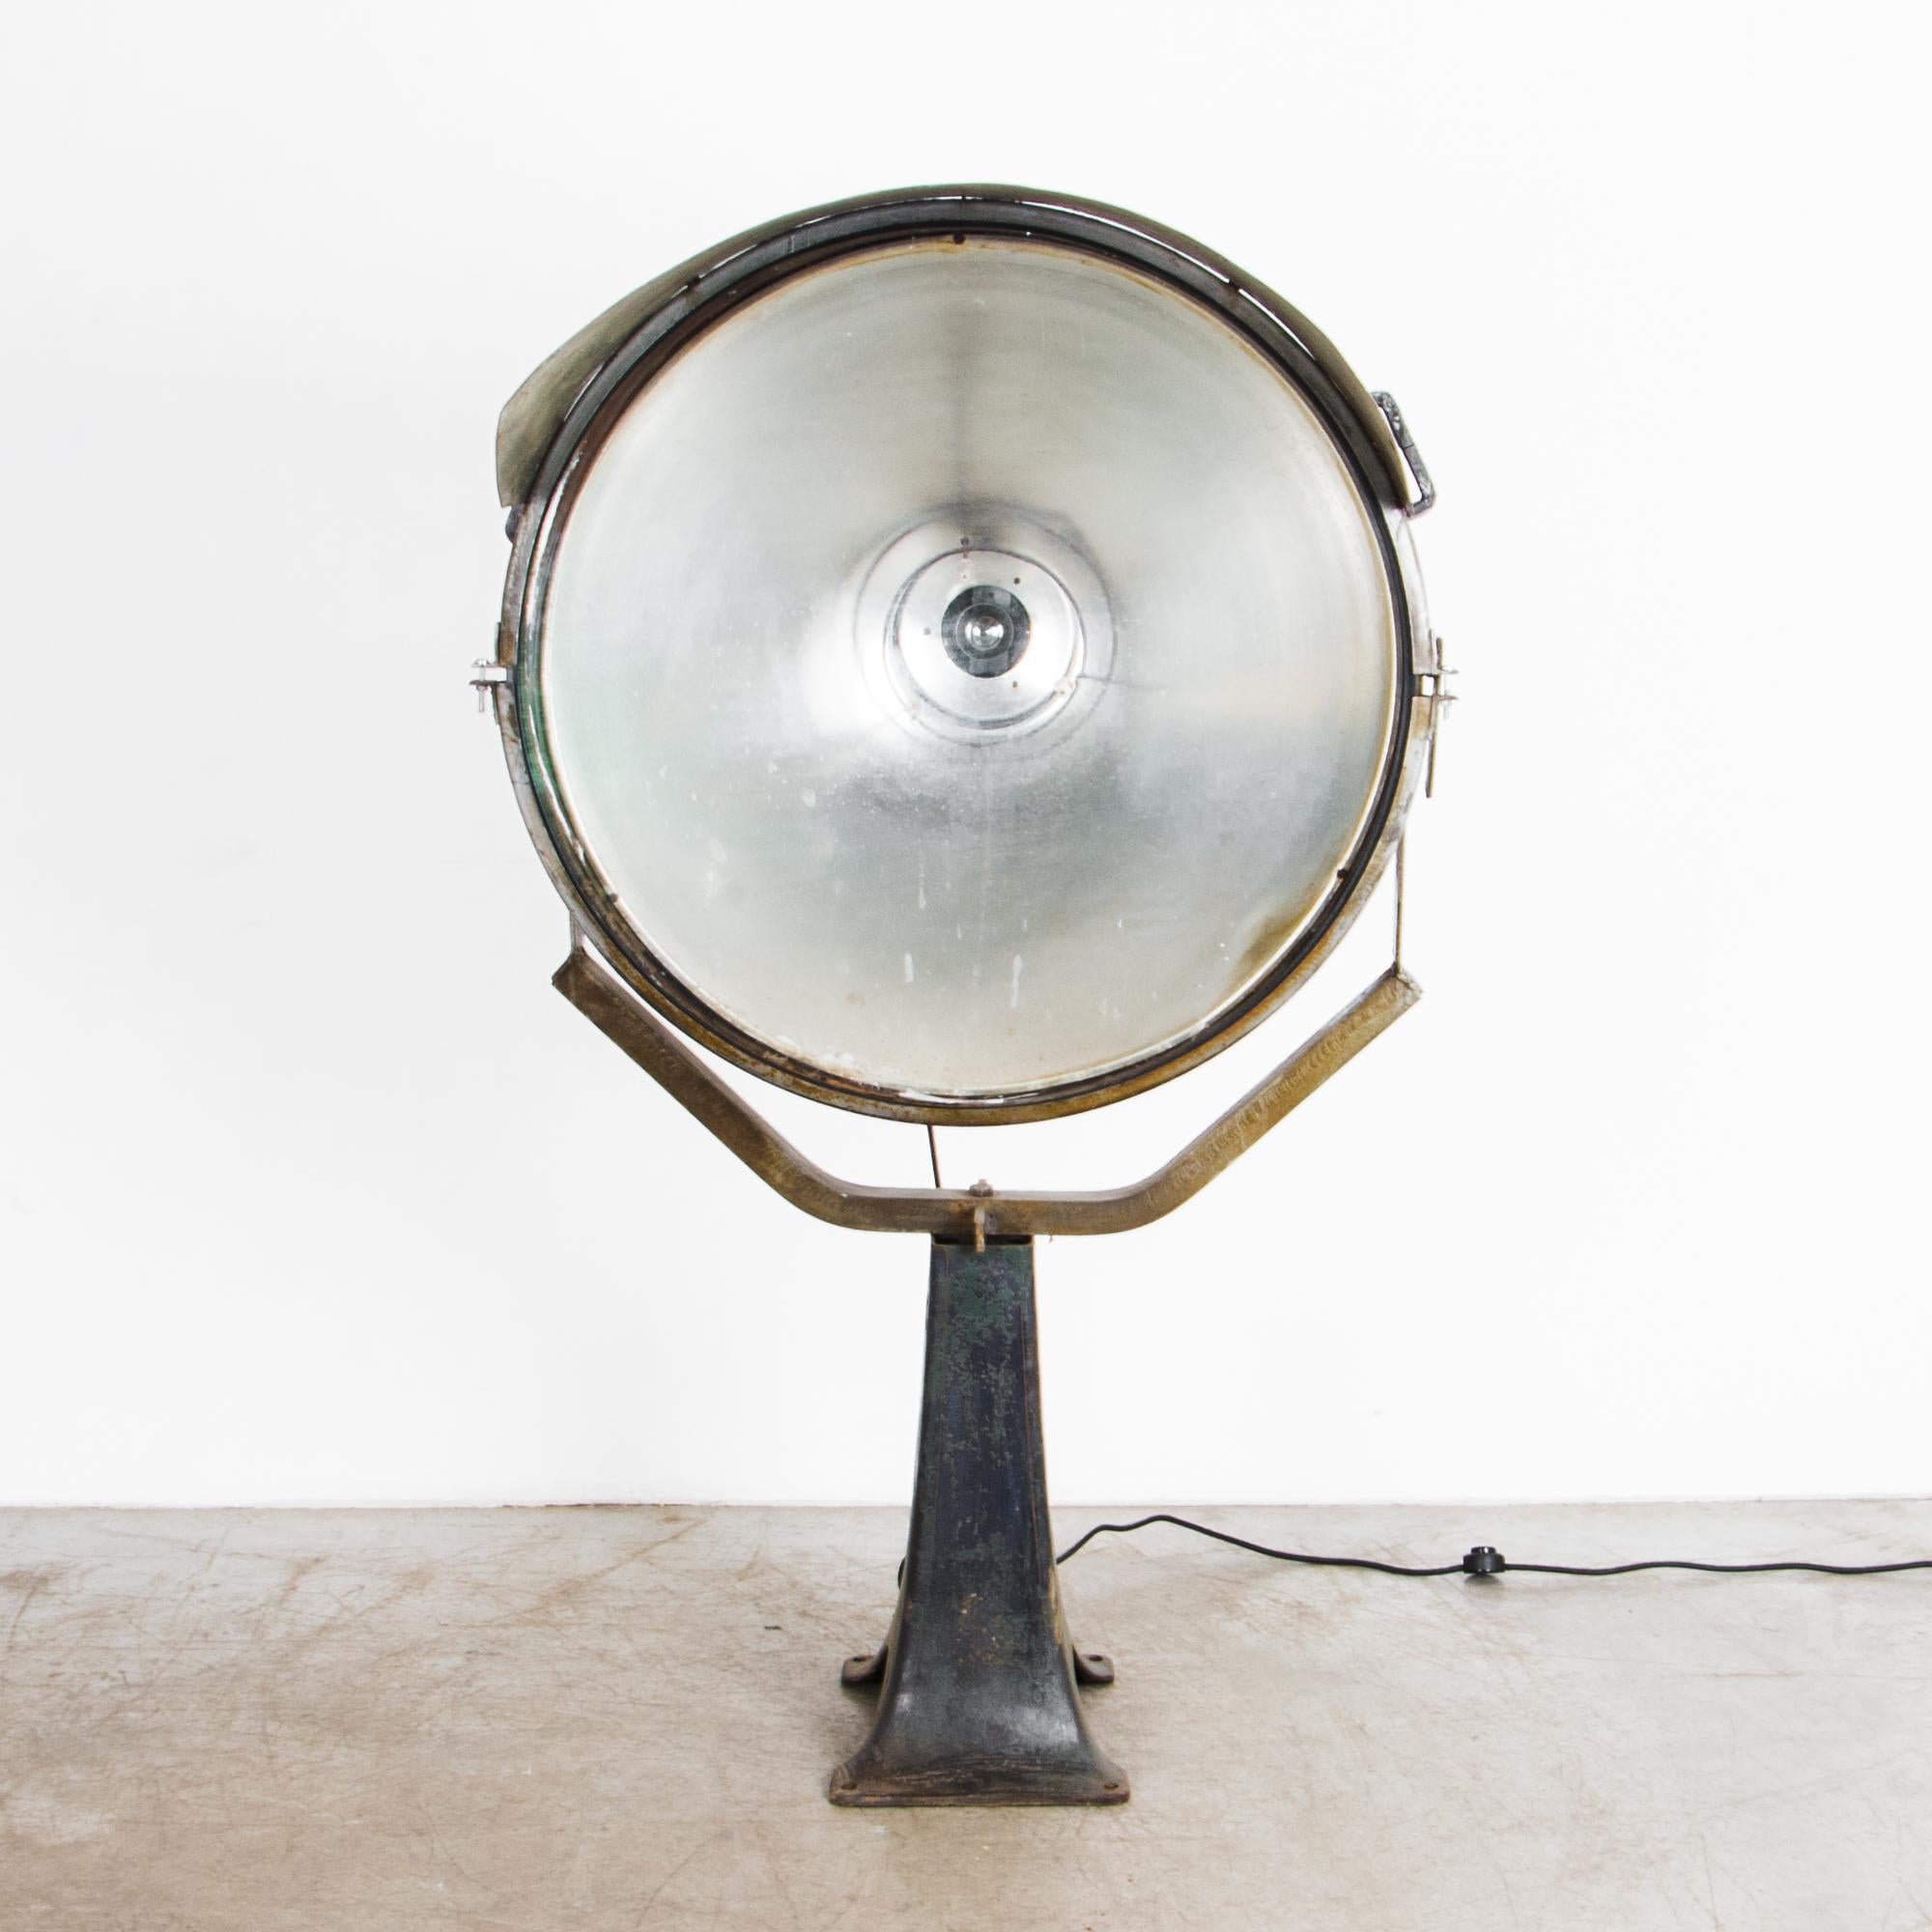 An industrial scale lighting fixture from Czech Republic, circa 1950. Updated and rewired for an interior setting, this lamp was originally used for architectural spotlighting. Beautiful textured patina shows the age, an embedded history of past